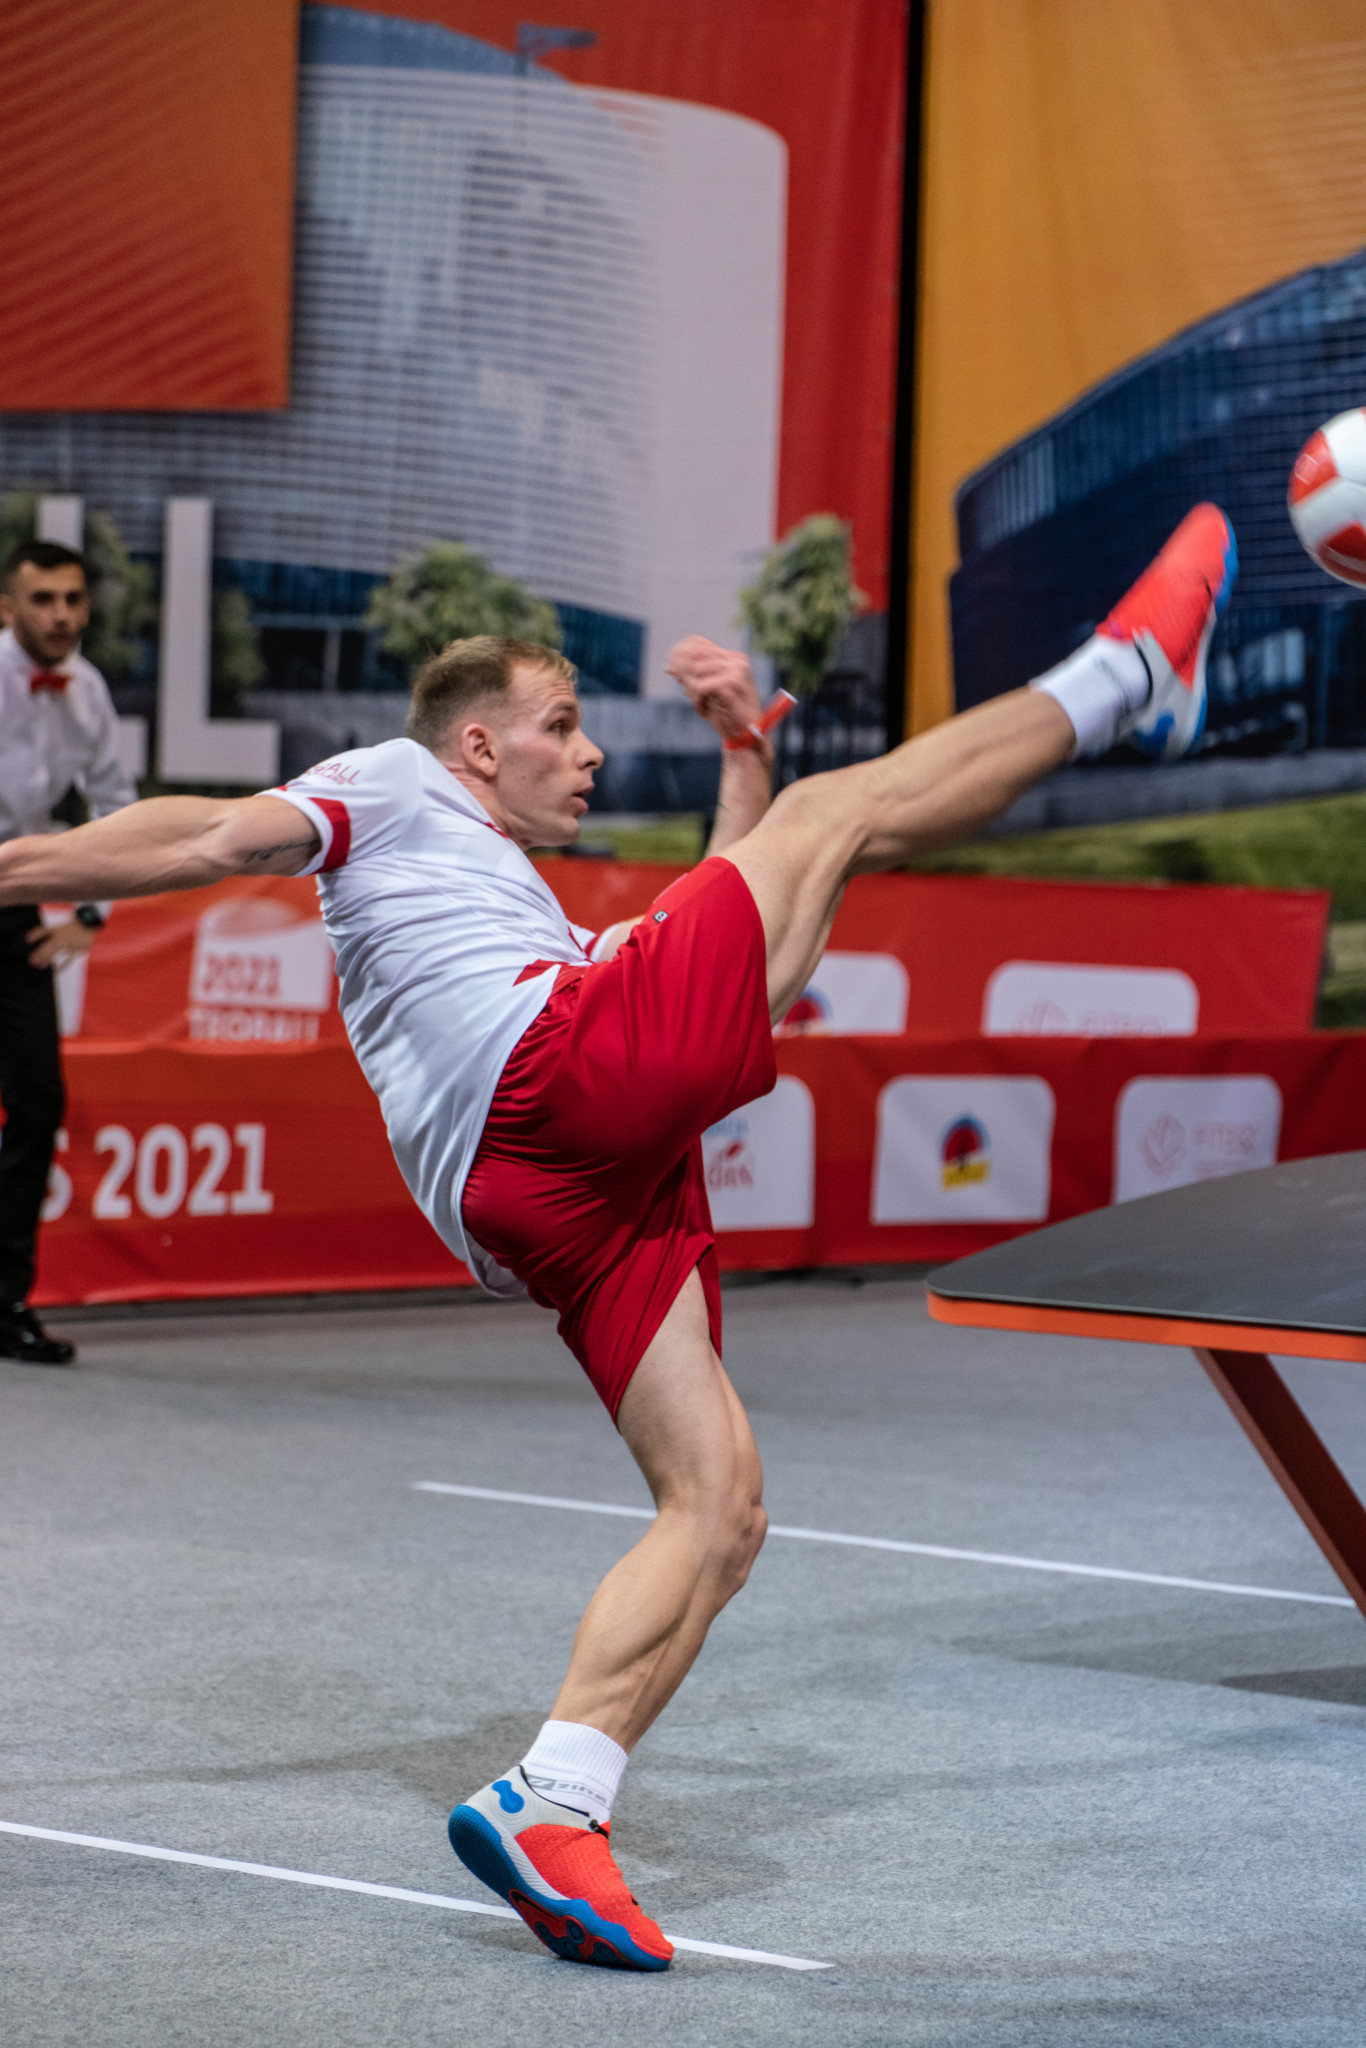 Poland has more than 1,000 teqball players across the country ©FITEQ